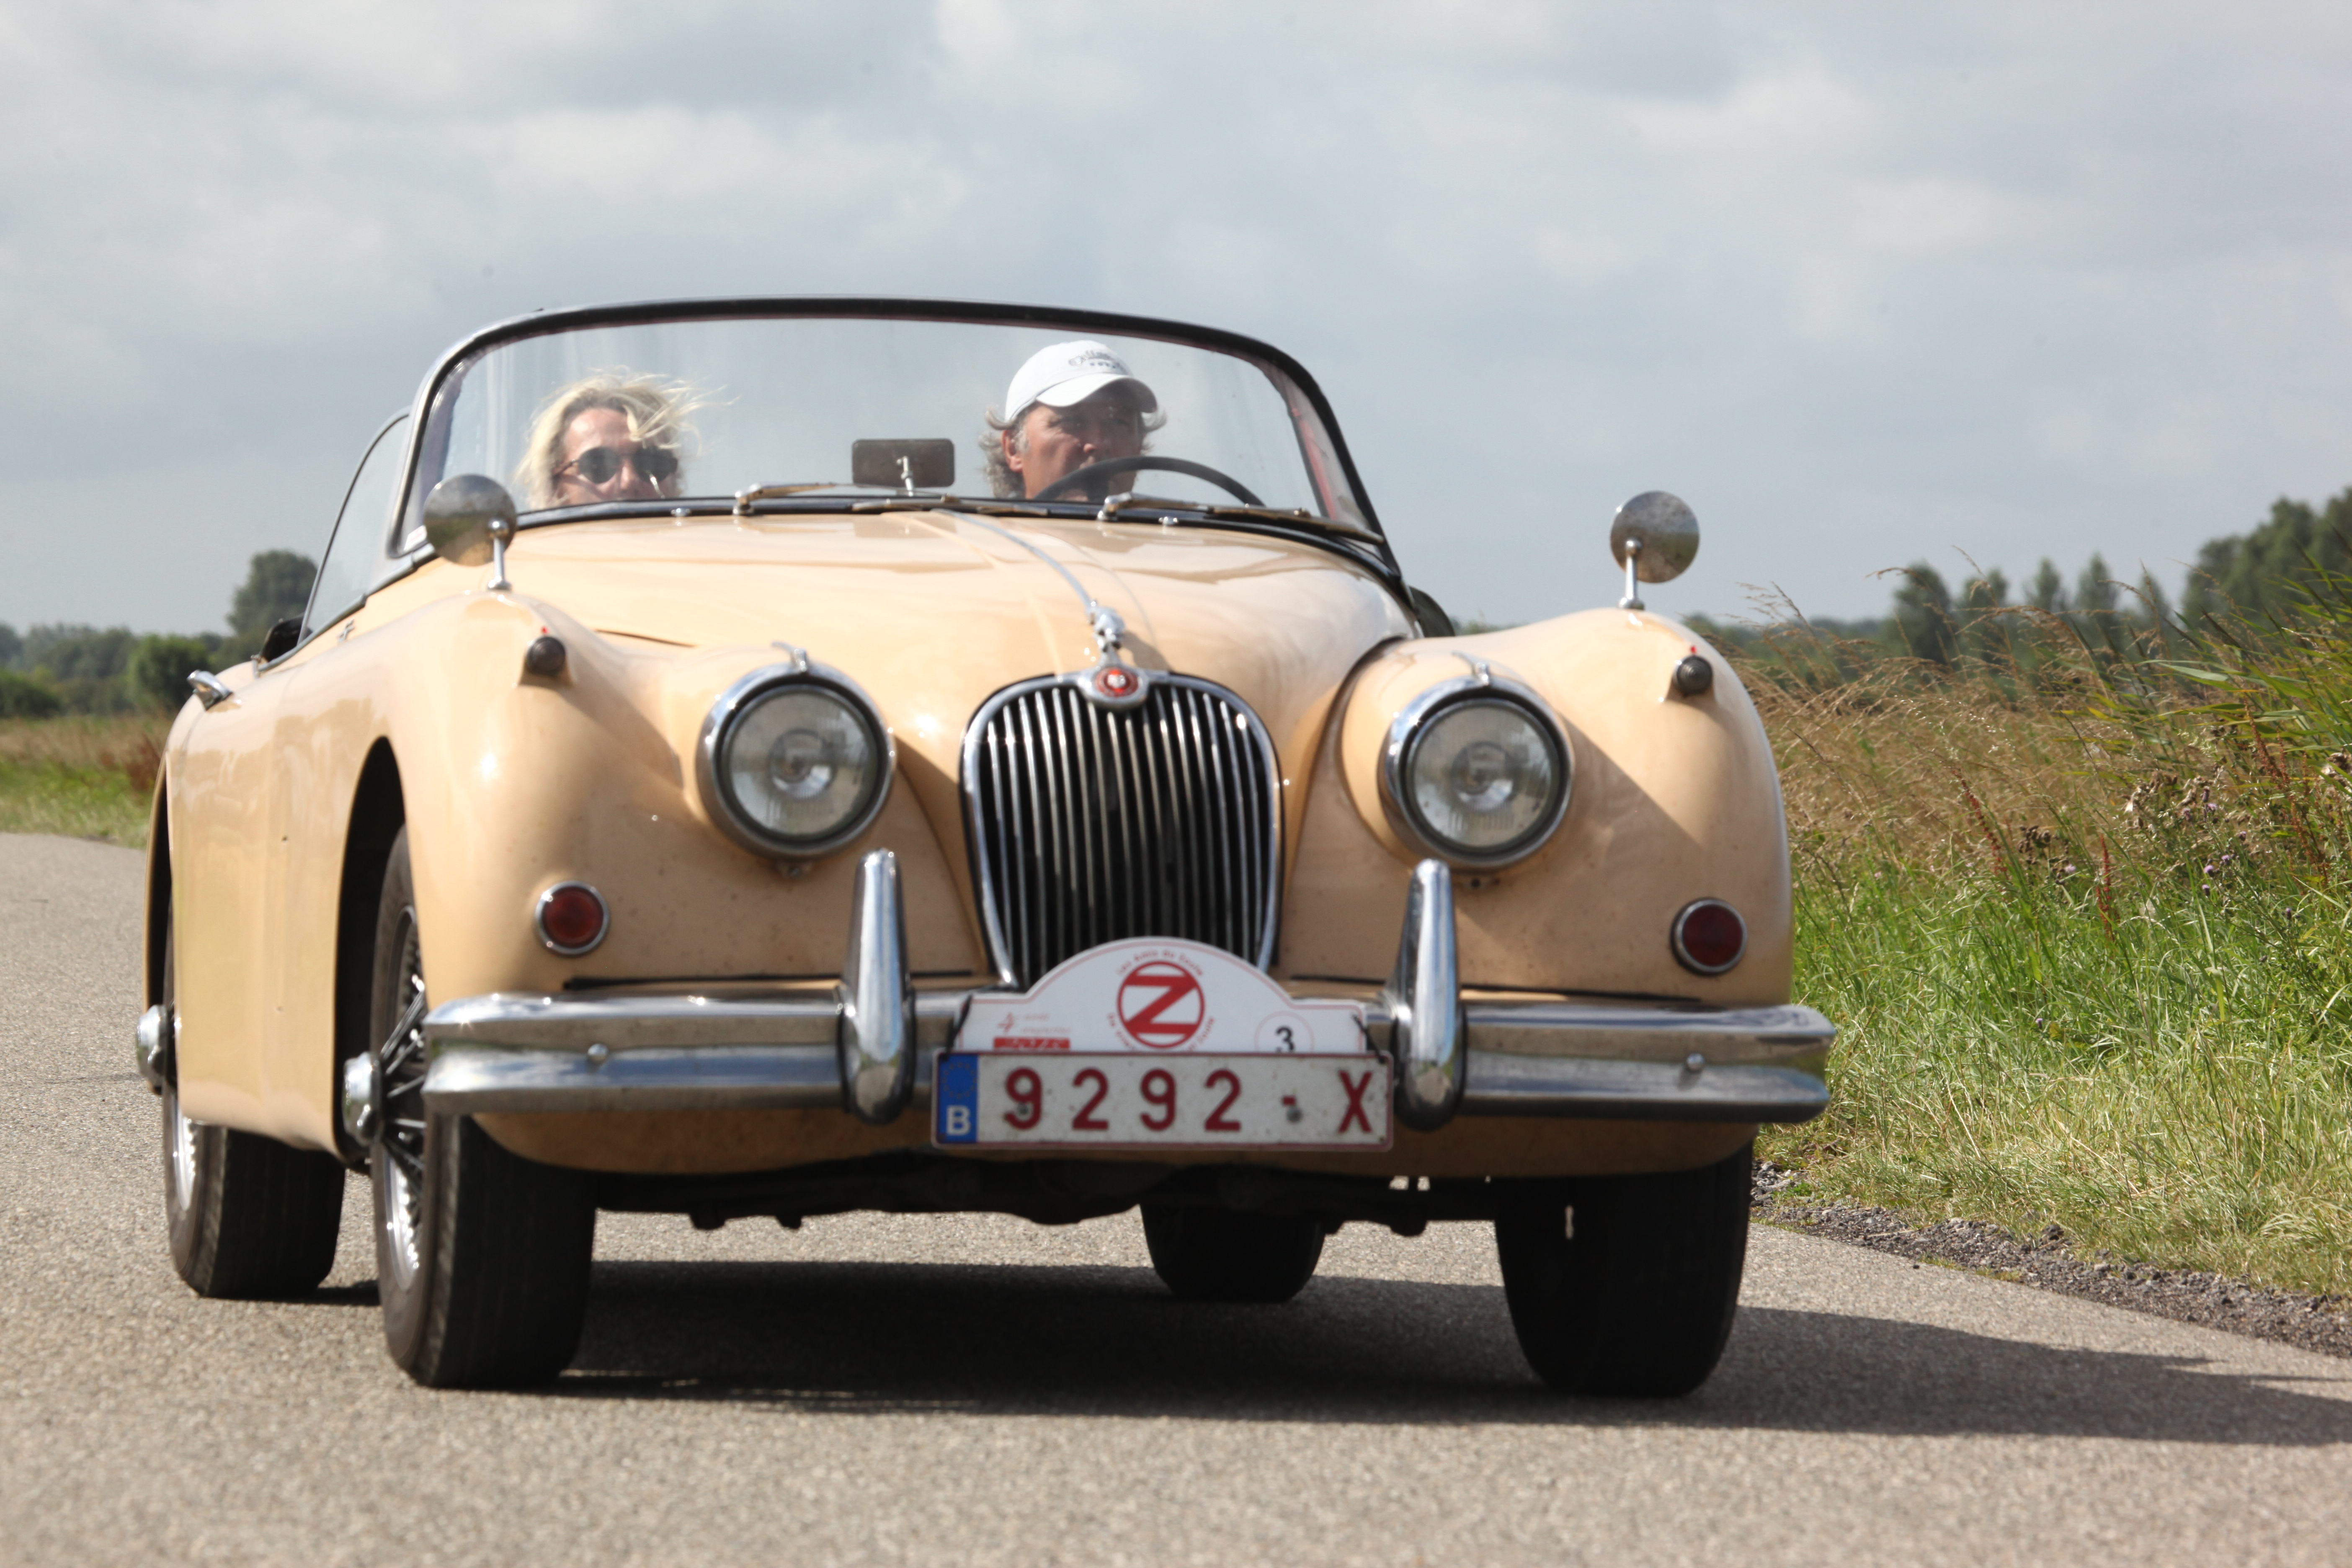 ZOUTE RALLYE OOK ZONDER OLD-TIMER